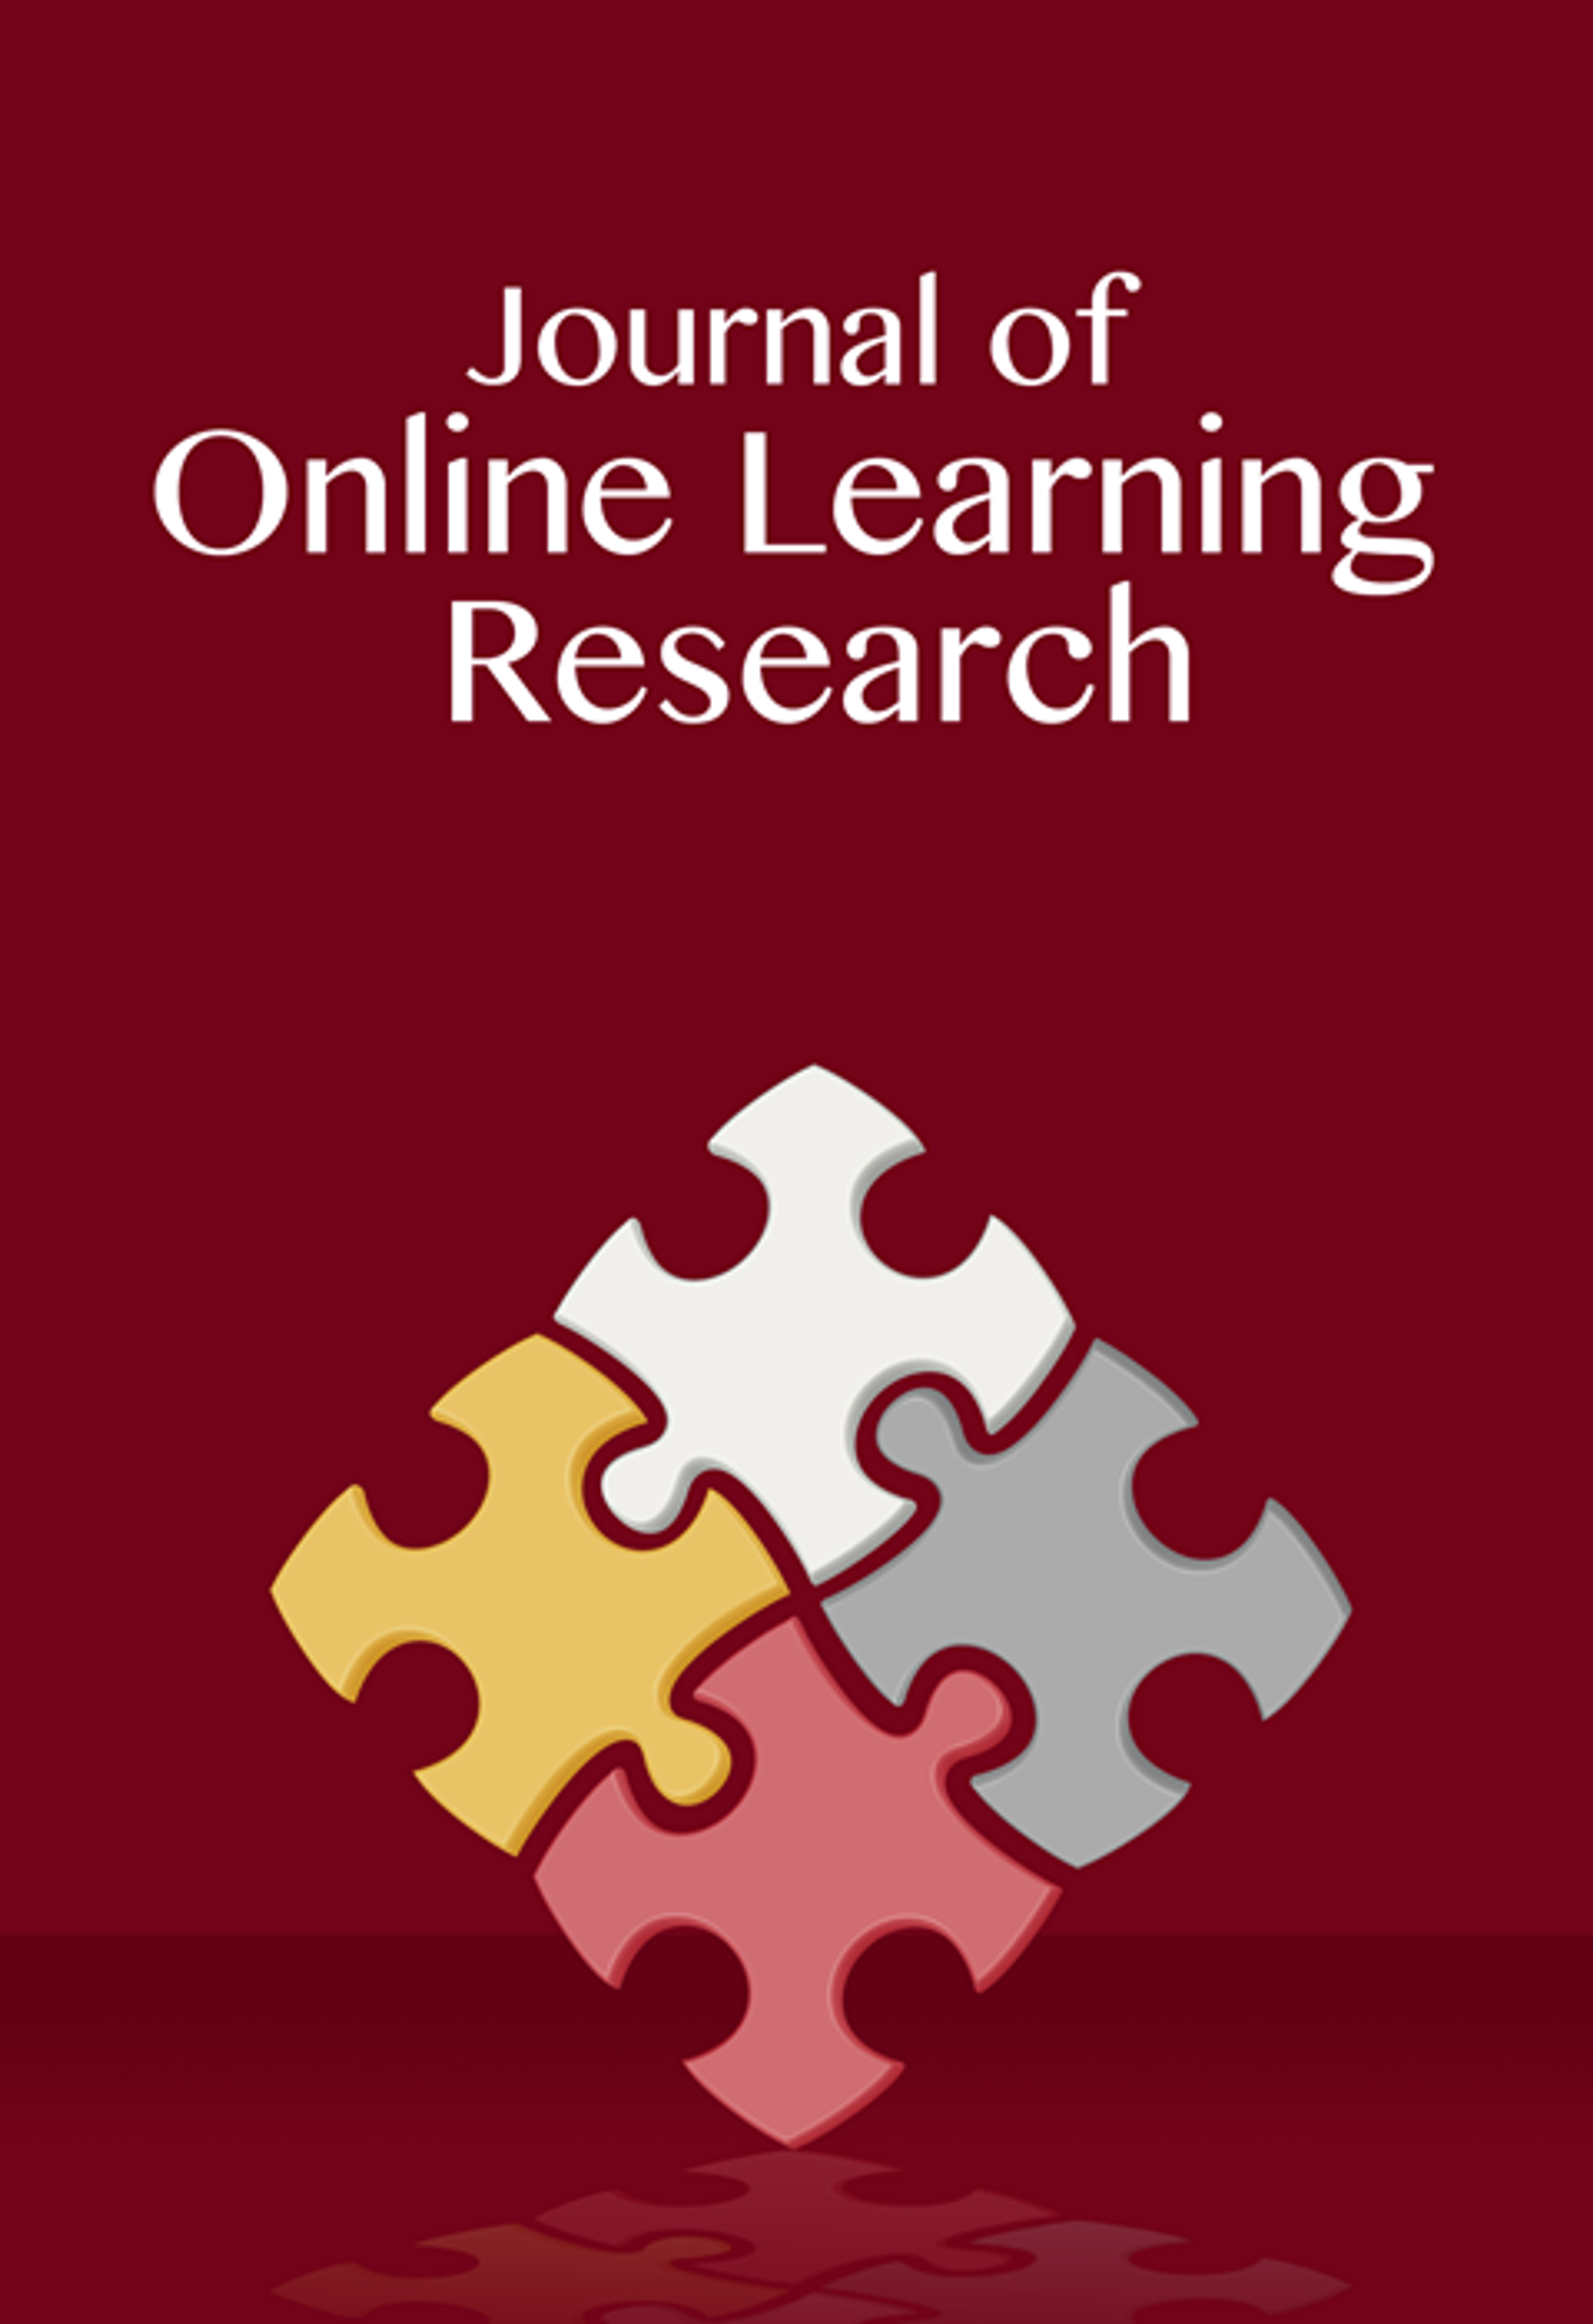 How Did Parents Balance It All? Work-From-Home Parents’ Engagement in Academic and Support Roles During Remote Learning